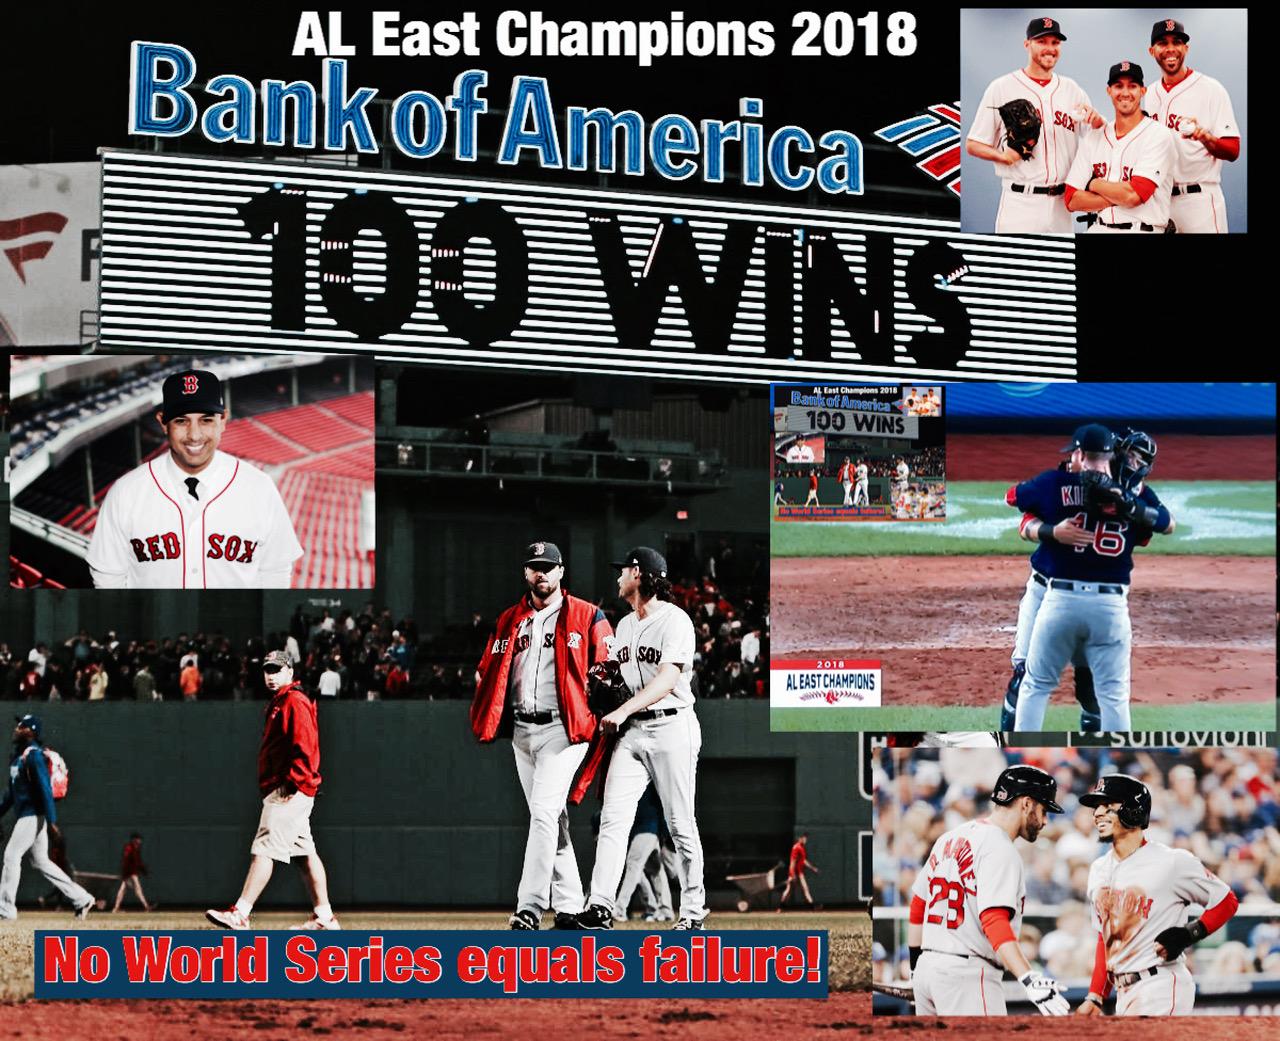 Red Sox must win it all!